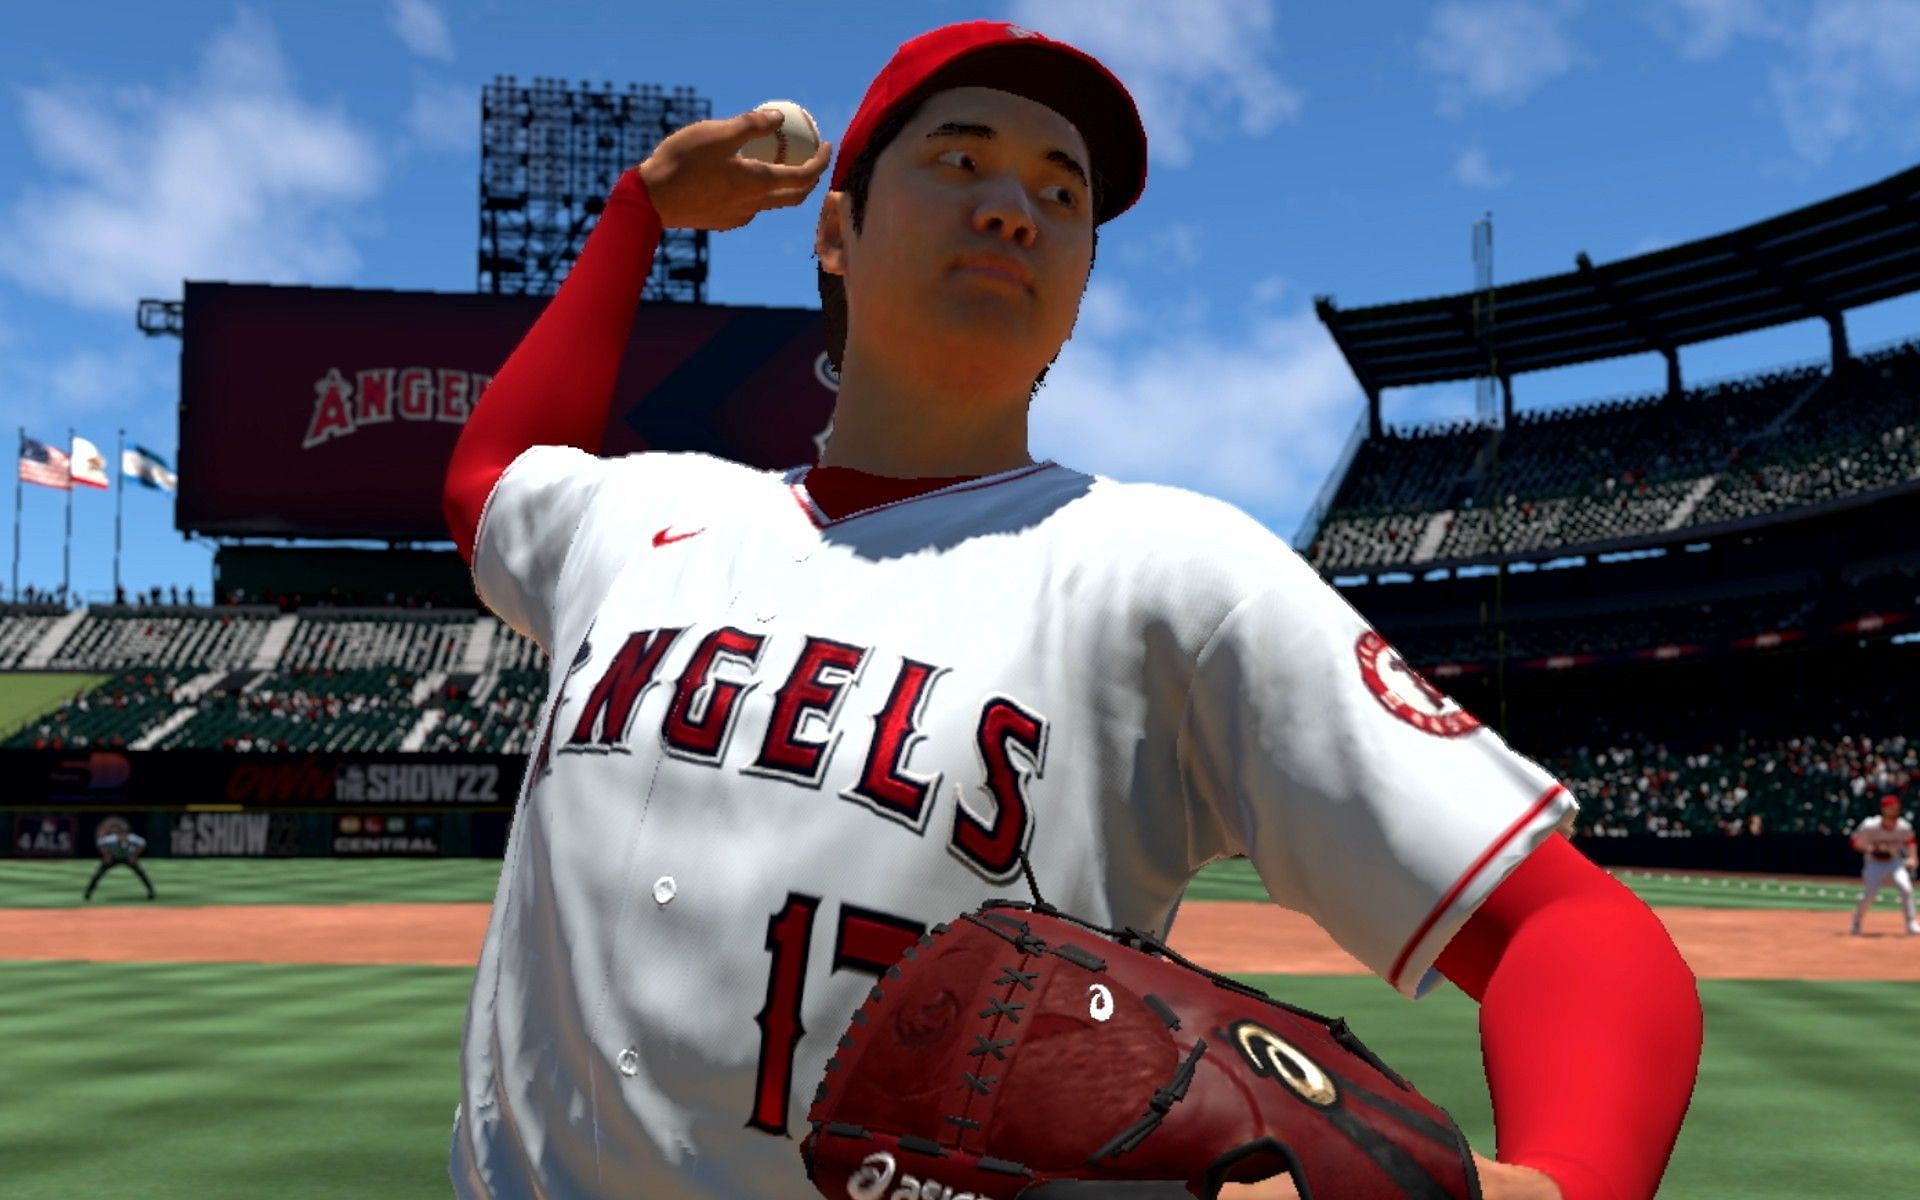 Pitching in MLB The Show 22 has various modes for accessibility (Image via San Diego Studio)